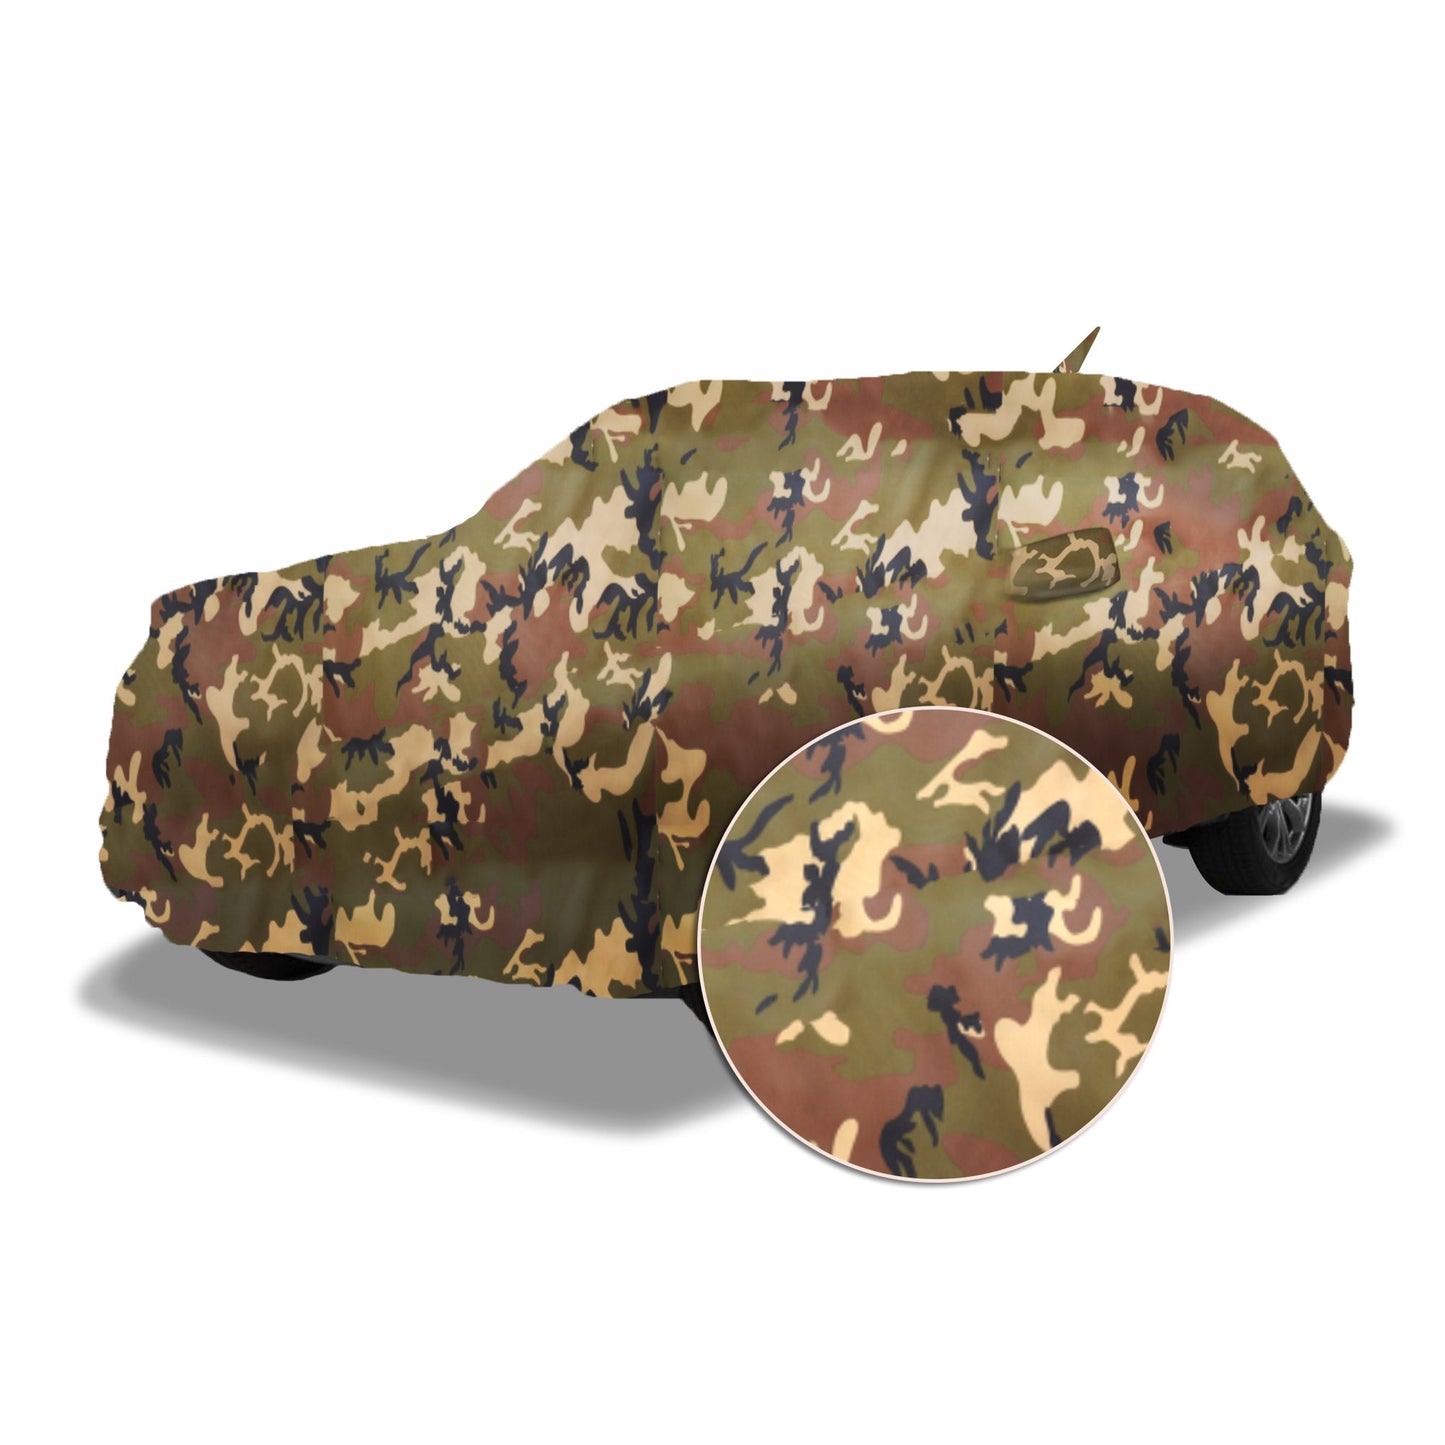 Ascot Skoda Kodiaq Car Body Cover Extra Strong & Dust Proof Jungle Military Car Cover with UV Proof & Water-Resistant Coating